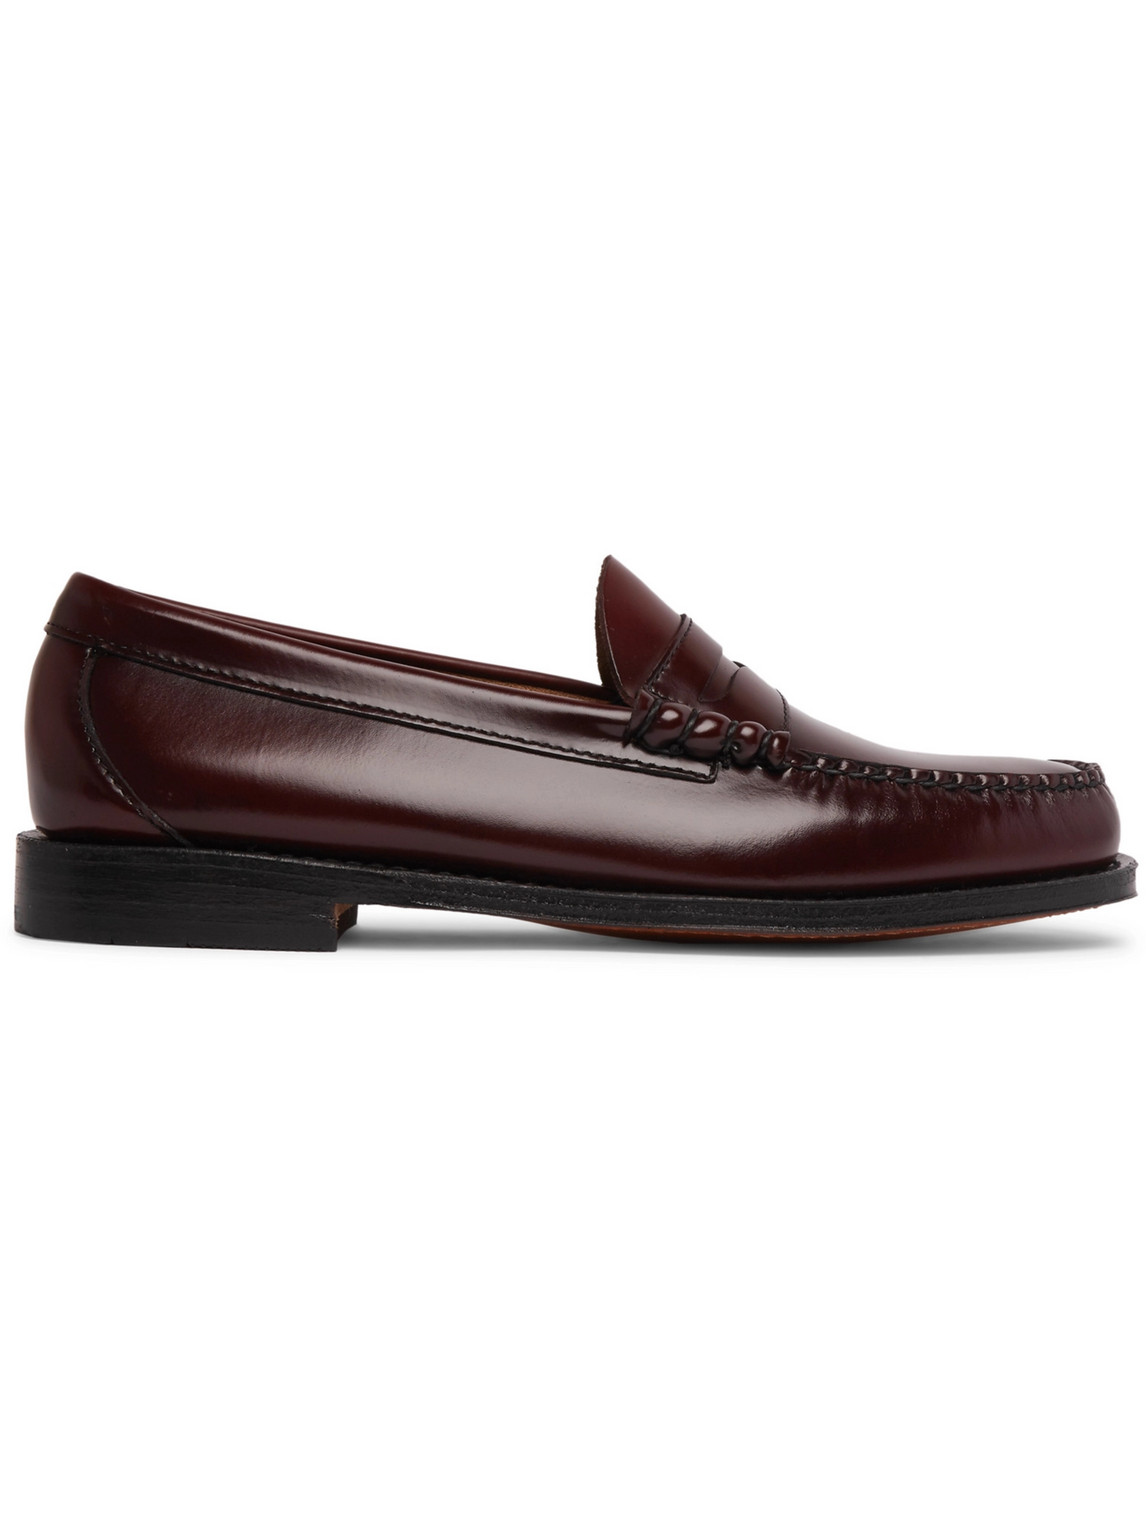 G.H. Bass & Co. - Weejuns Heritage Larson Leather Penny Loafers - Men ...